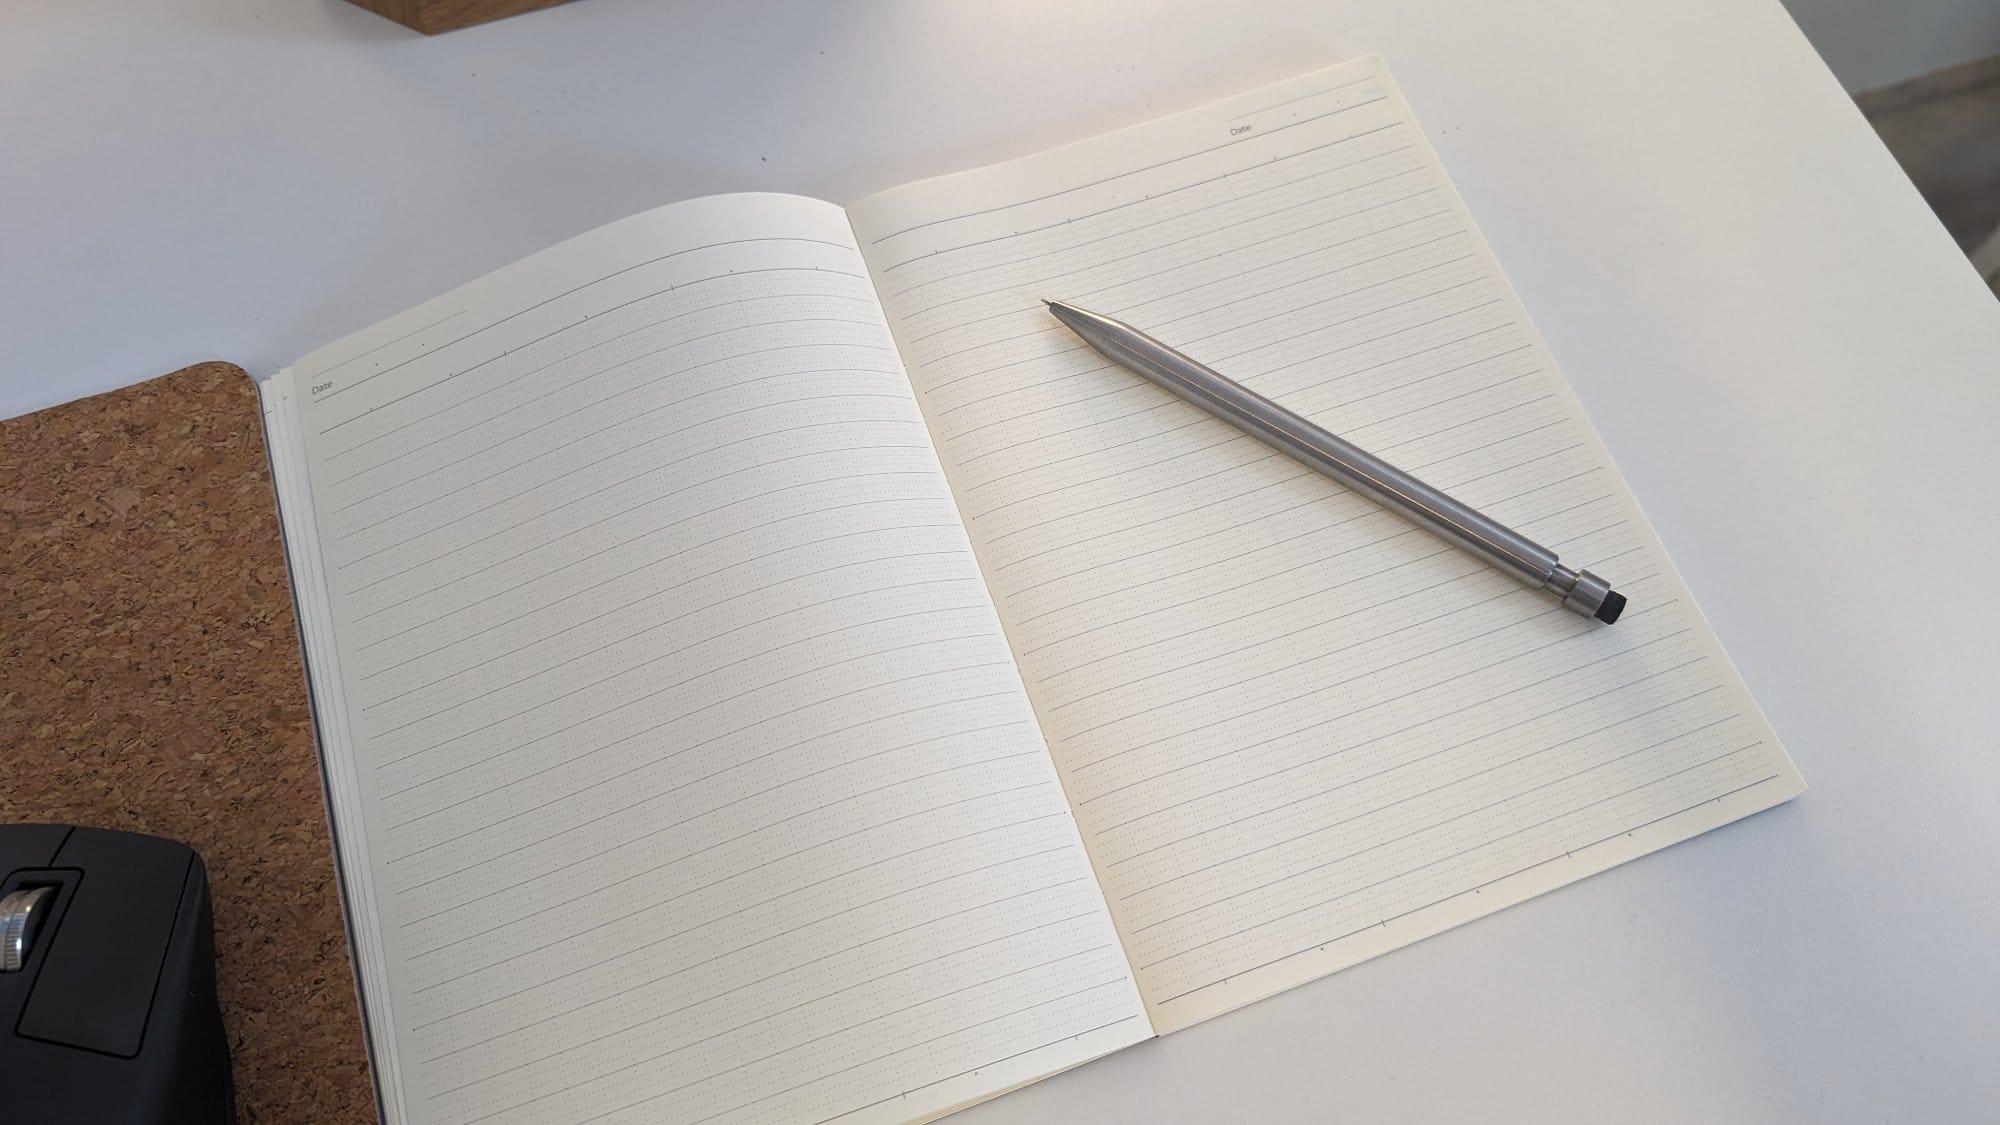  An open lined notebook with a metallic pen resting on the right page, placed on a white surface next to a cork desk mat